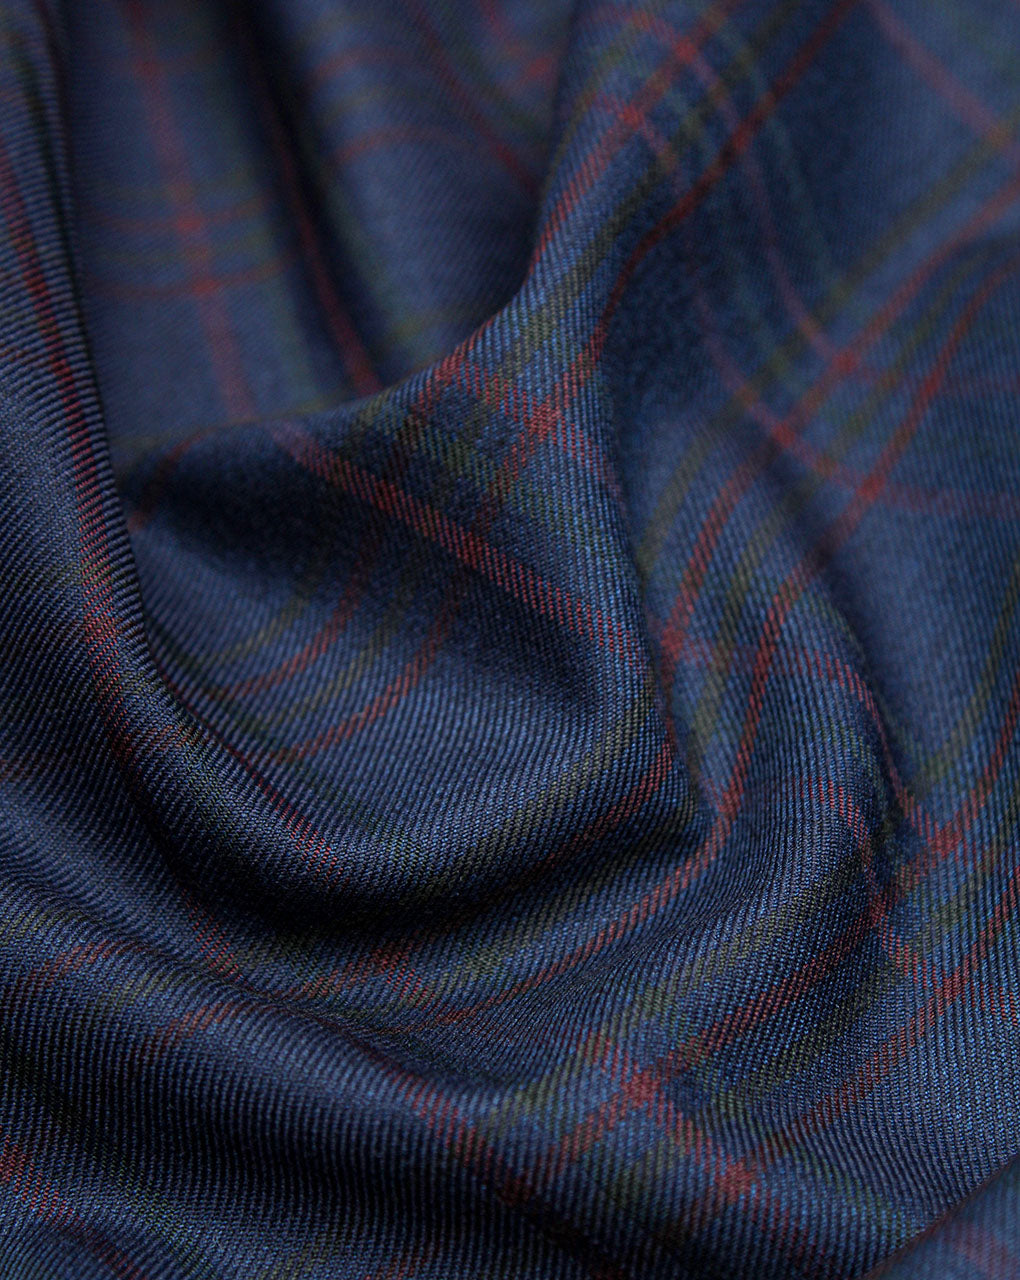 Navy Blue And Red Checks Woolen Suiting Fabric